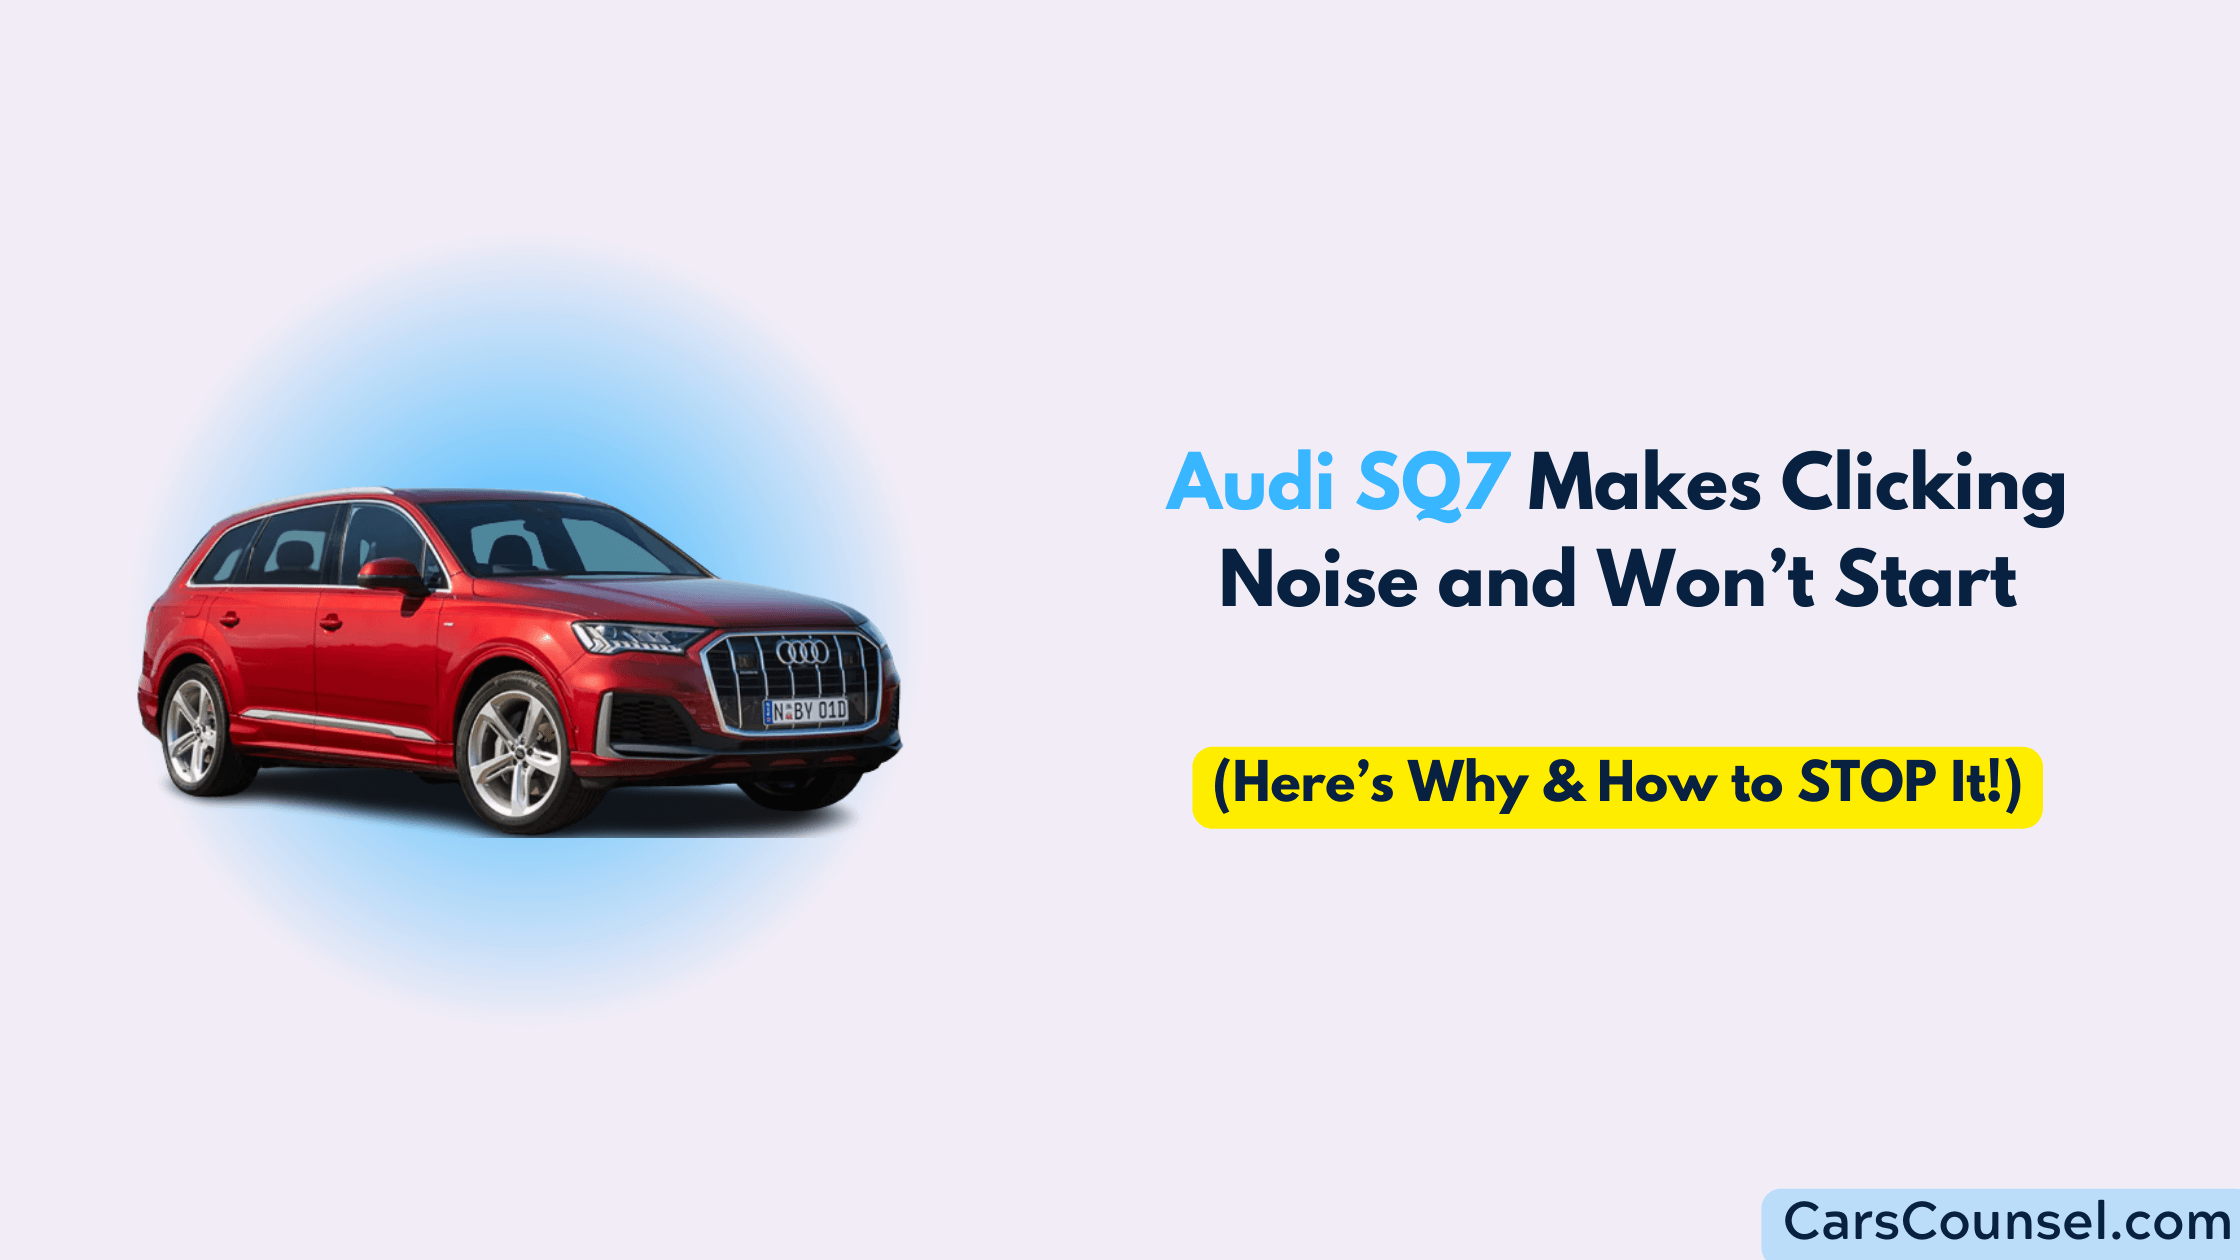 Audi Sq7 Makes Clicking Noise And Won’t Start